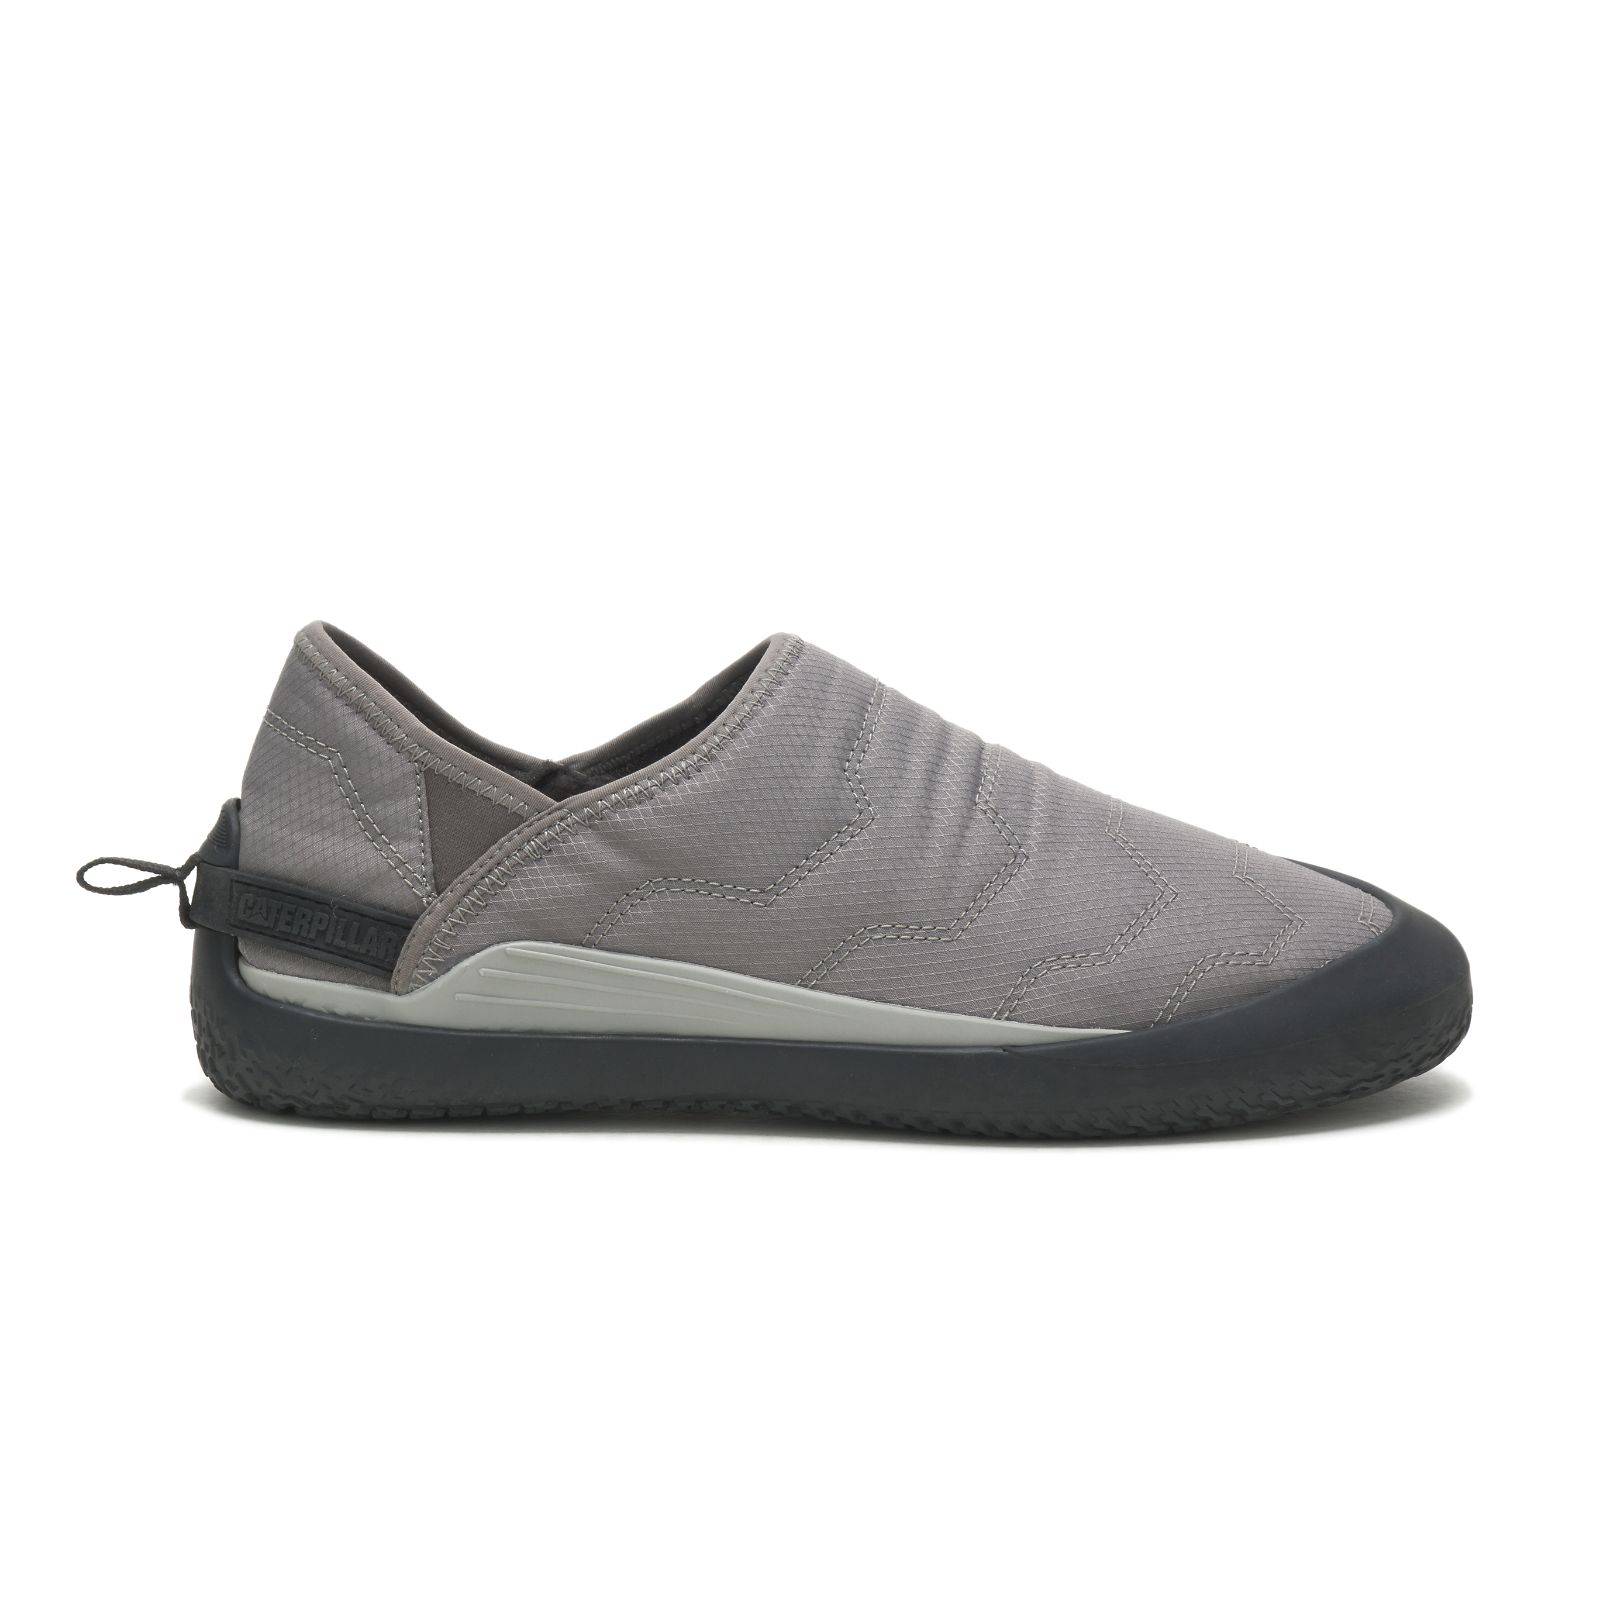 Caterpillar Shoes Sale - Caterpillar Crossover Mens Slip On Shoes Grey (510873-XWL)